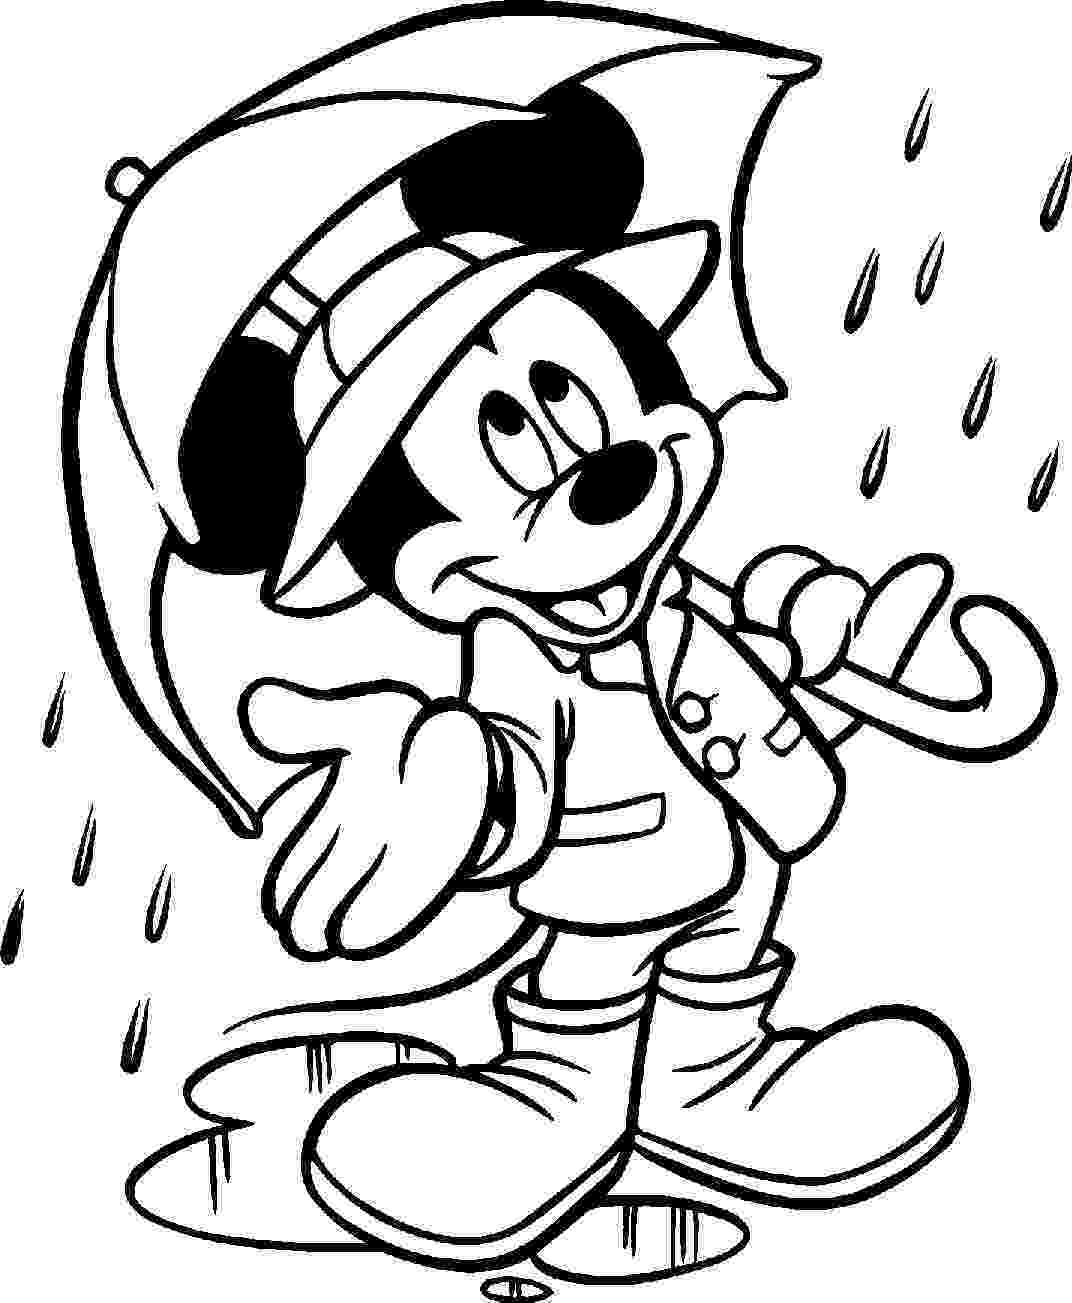 mickey mouse clubhouse coloring page mickey mouse clubhouse 1 free disney coloring sheets coloring mickey clubhouse mouse page 